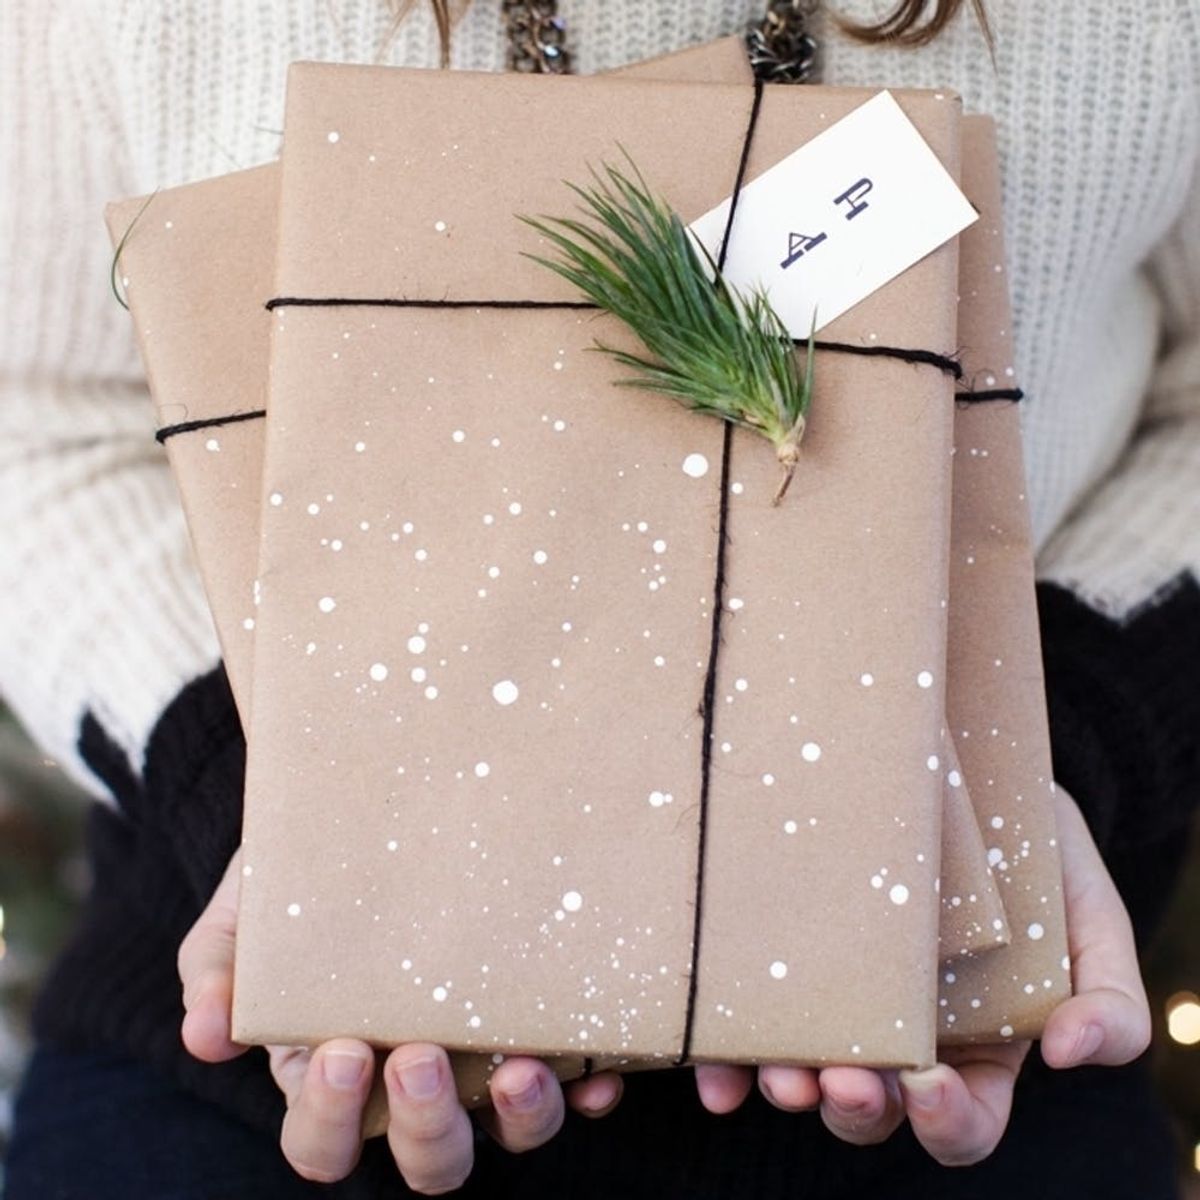 21 Ways to Upgrade Your Butcher Paper Gift Wrap